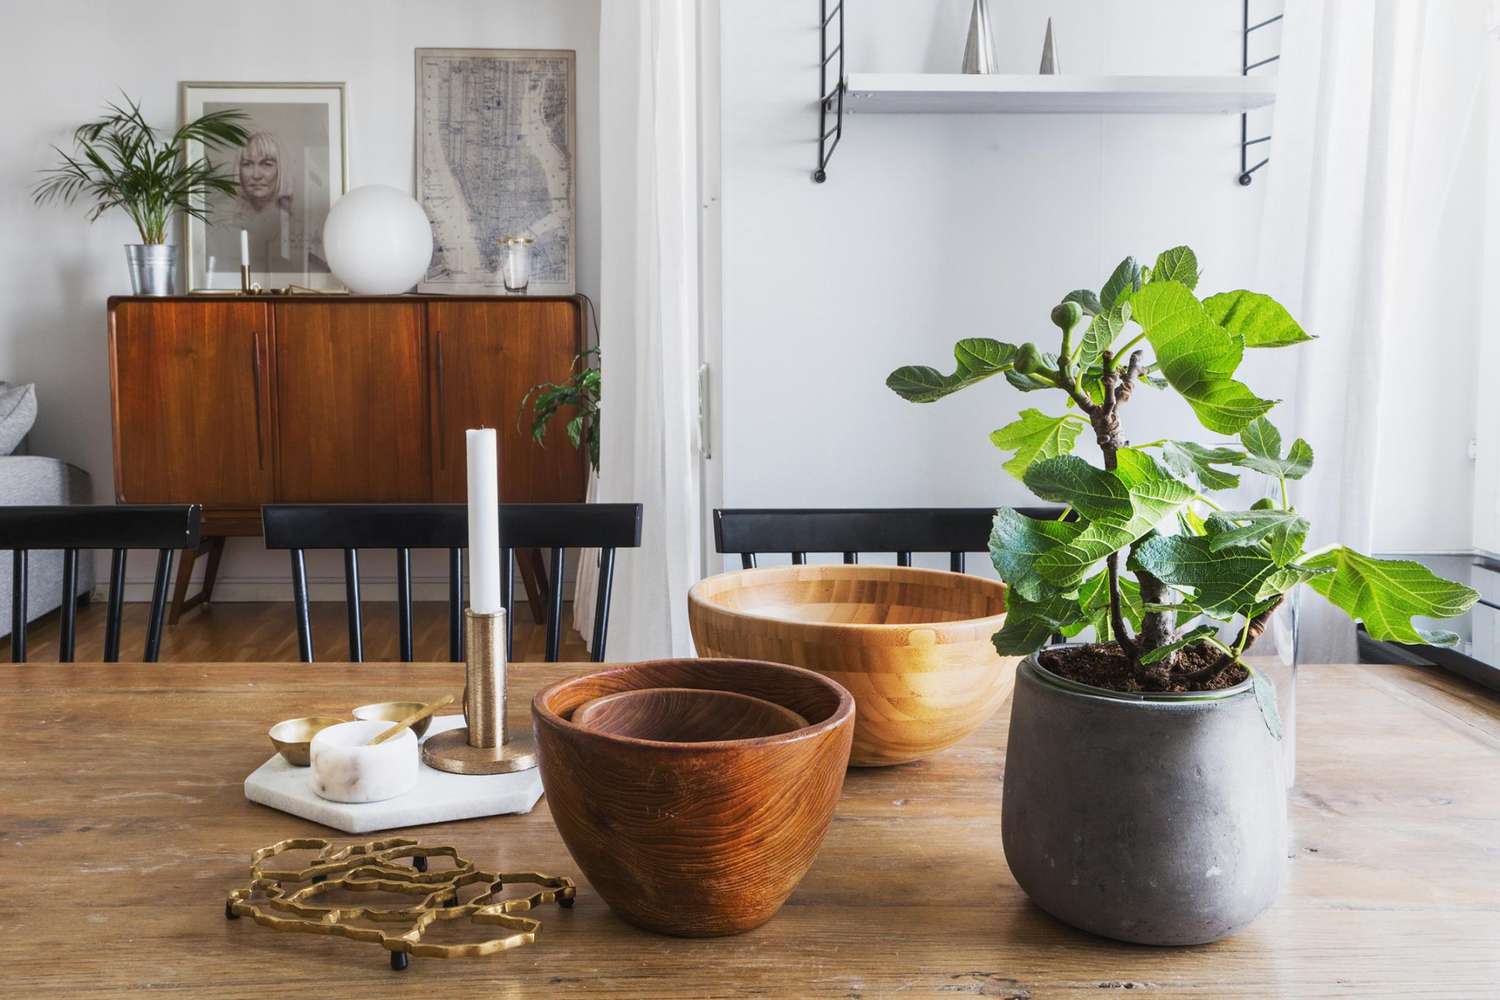 wood bowls next to a small potted plant